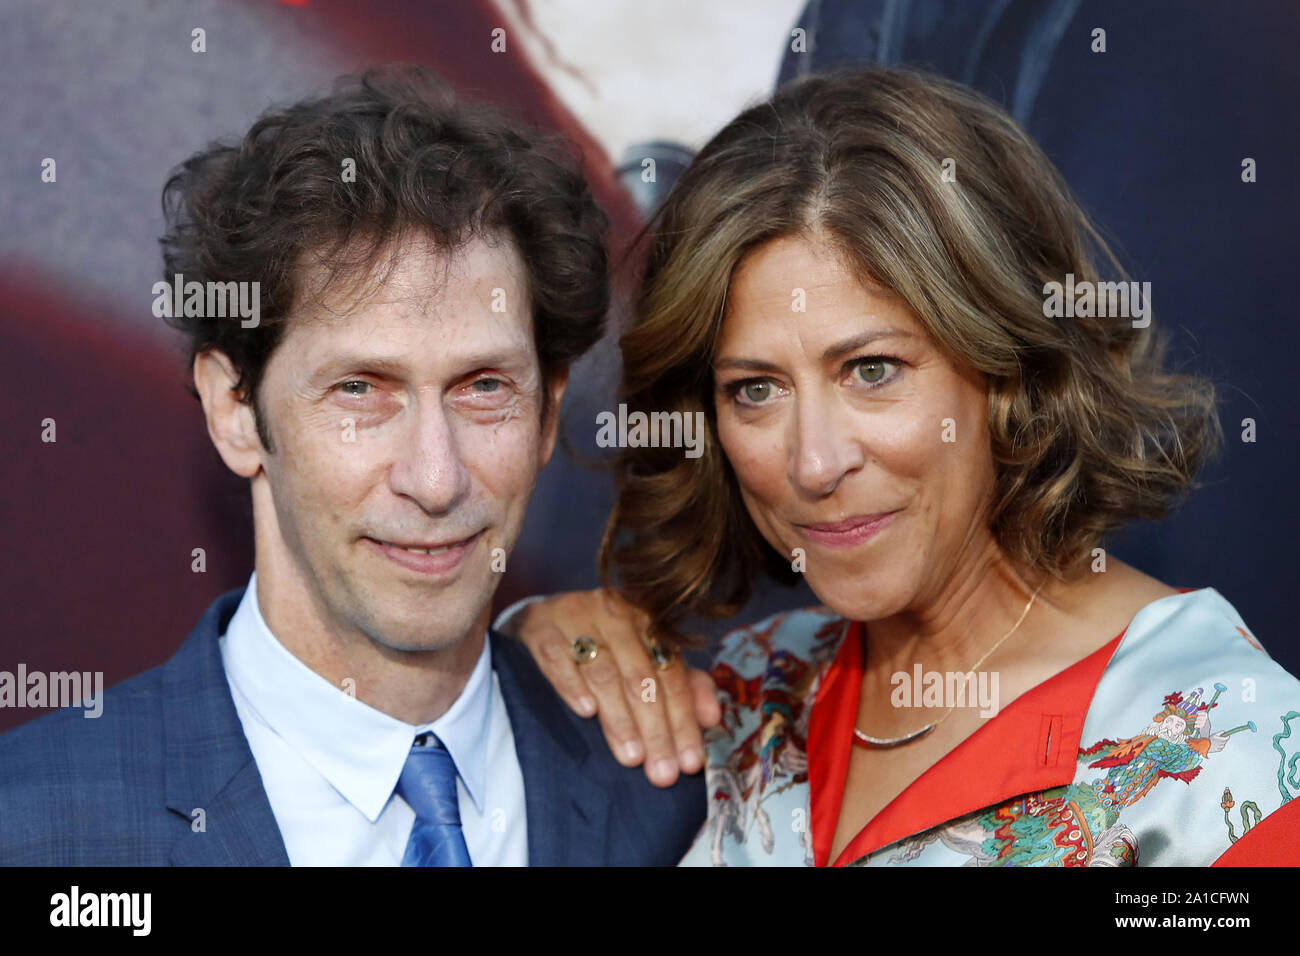 'Angel Has Fallen' Premiere at the Village Theater on August 20, 2019 in Westwood, CA Featuring: Tim Blake Nelson, Lisa Benavides Where: Westwood, California, United States When: 21 Aug 2019 Credit: Nicky Nelson/WENN.com Stock Photo